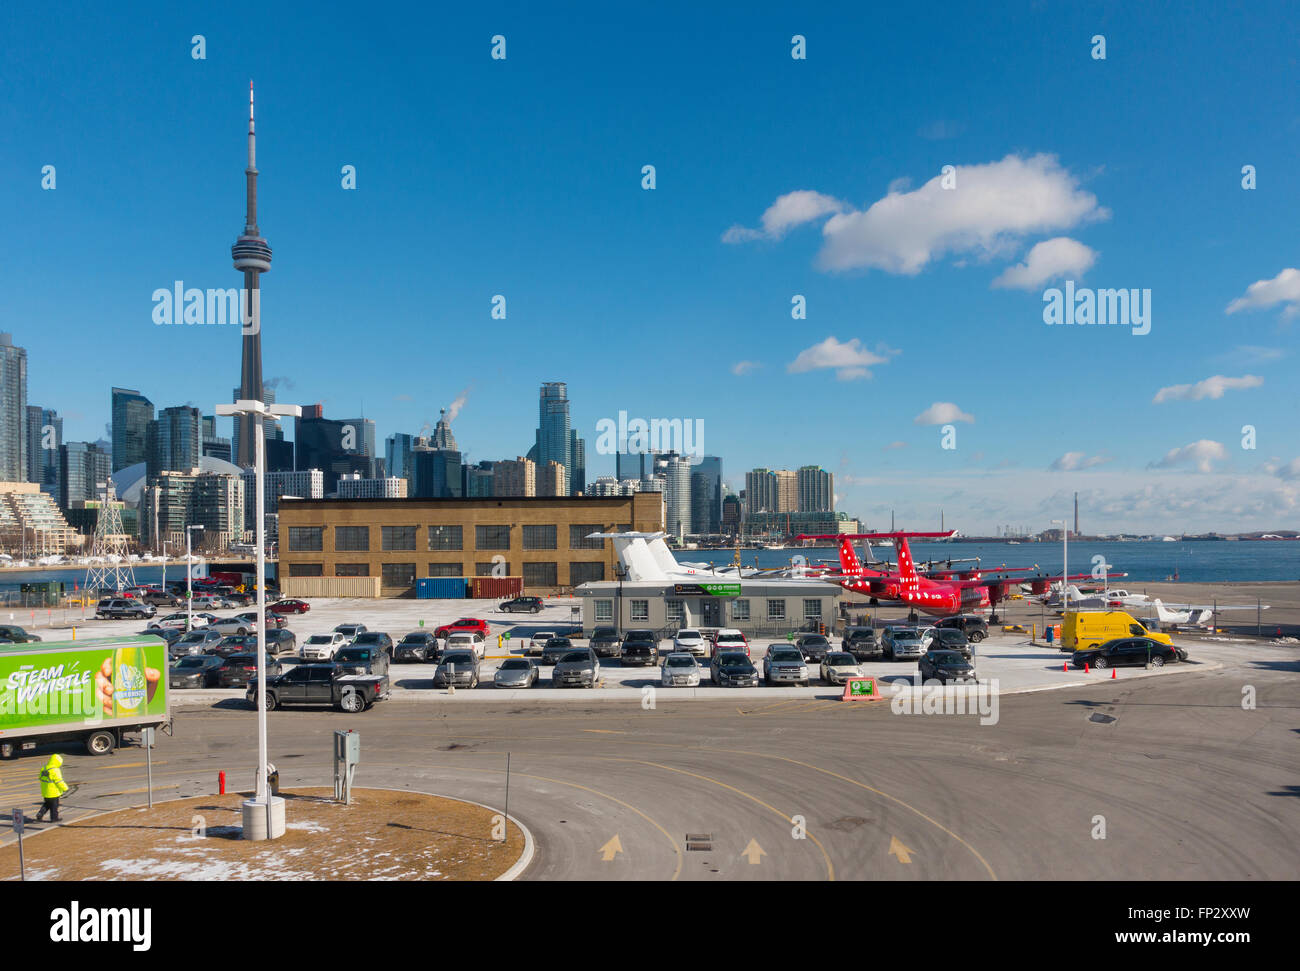 The Toronto skyline and planes from the Billy Bishop Toronto City Airport overlooking the parking lot. Toronto, Ontario, Canada. Stock Photo